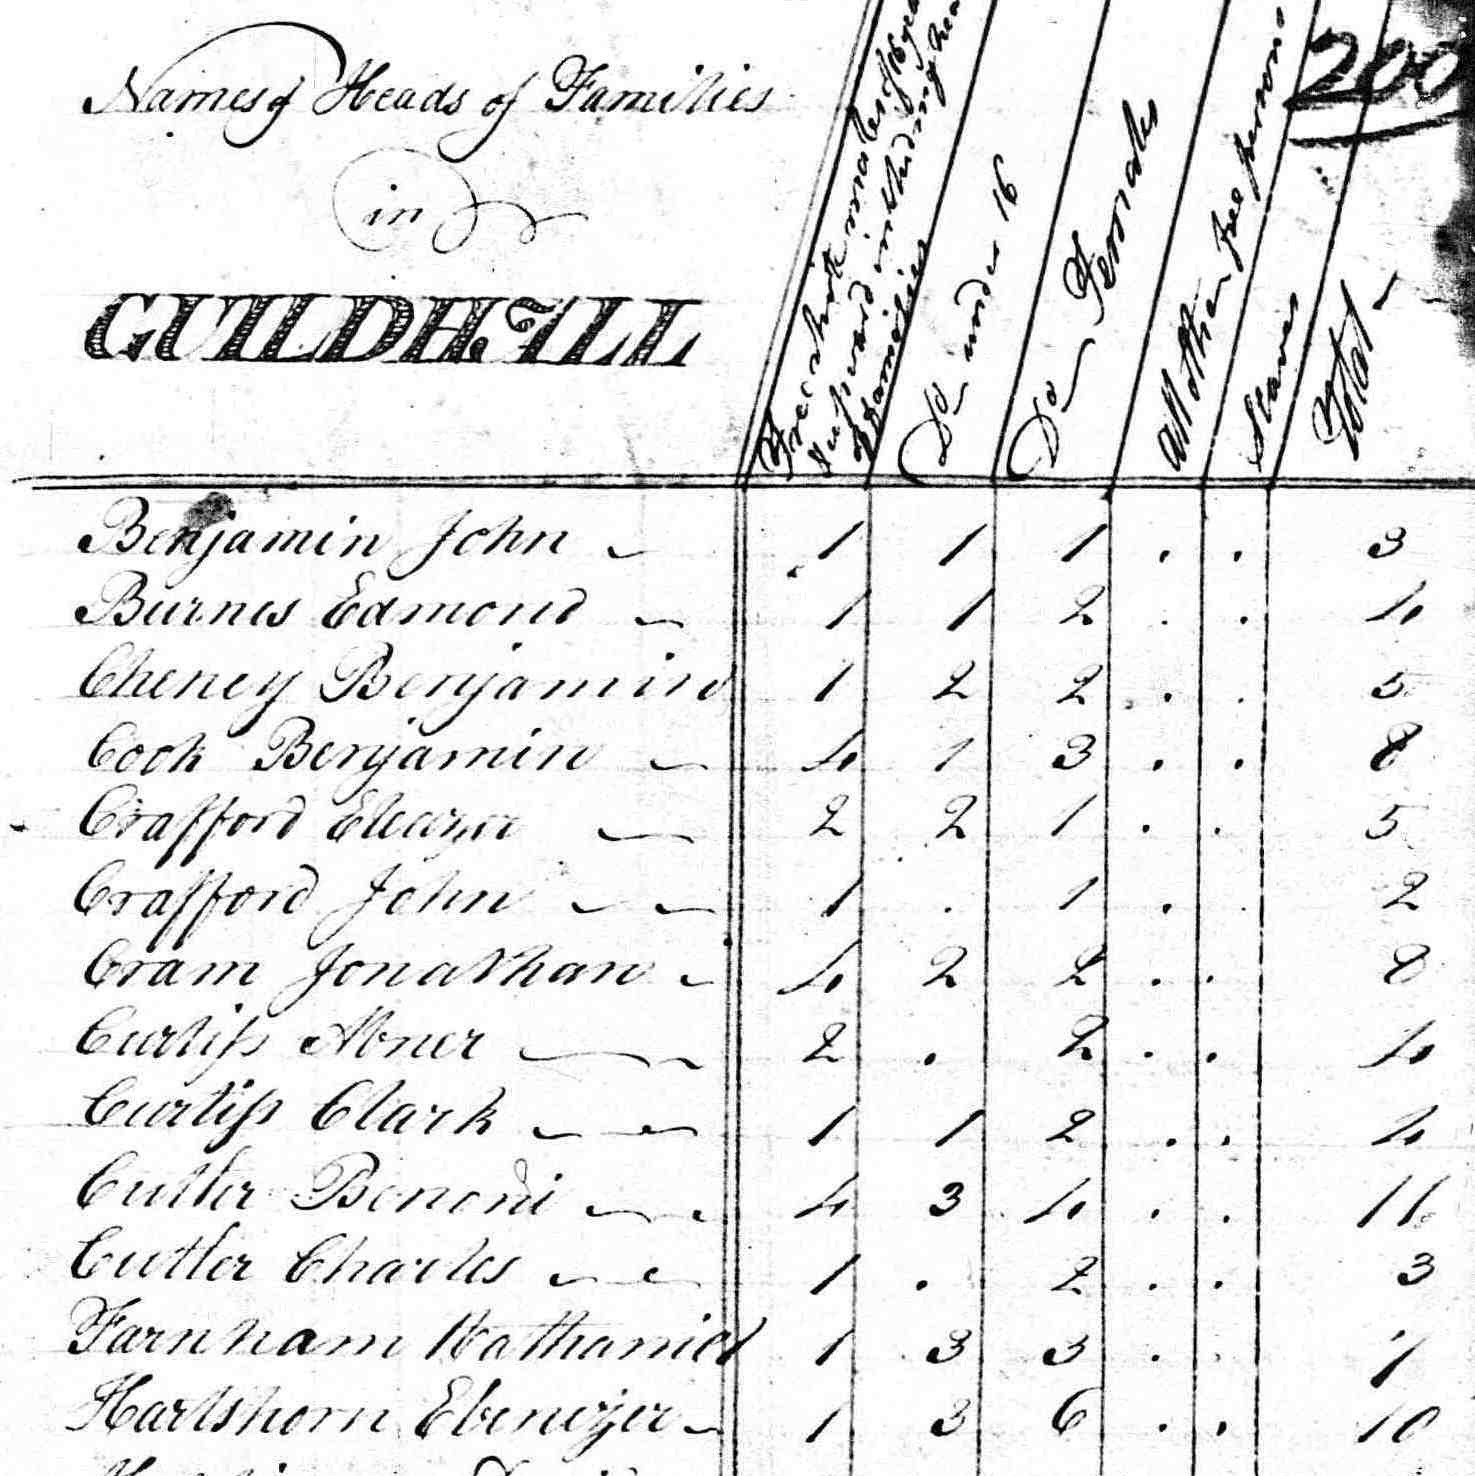 1791 Census form from Guildhall, VT